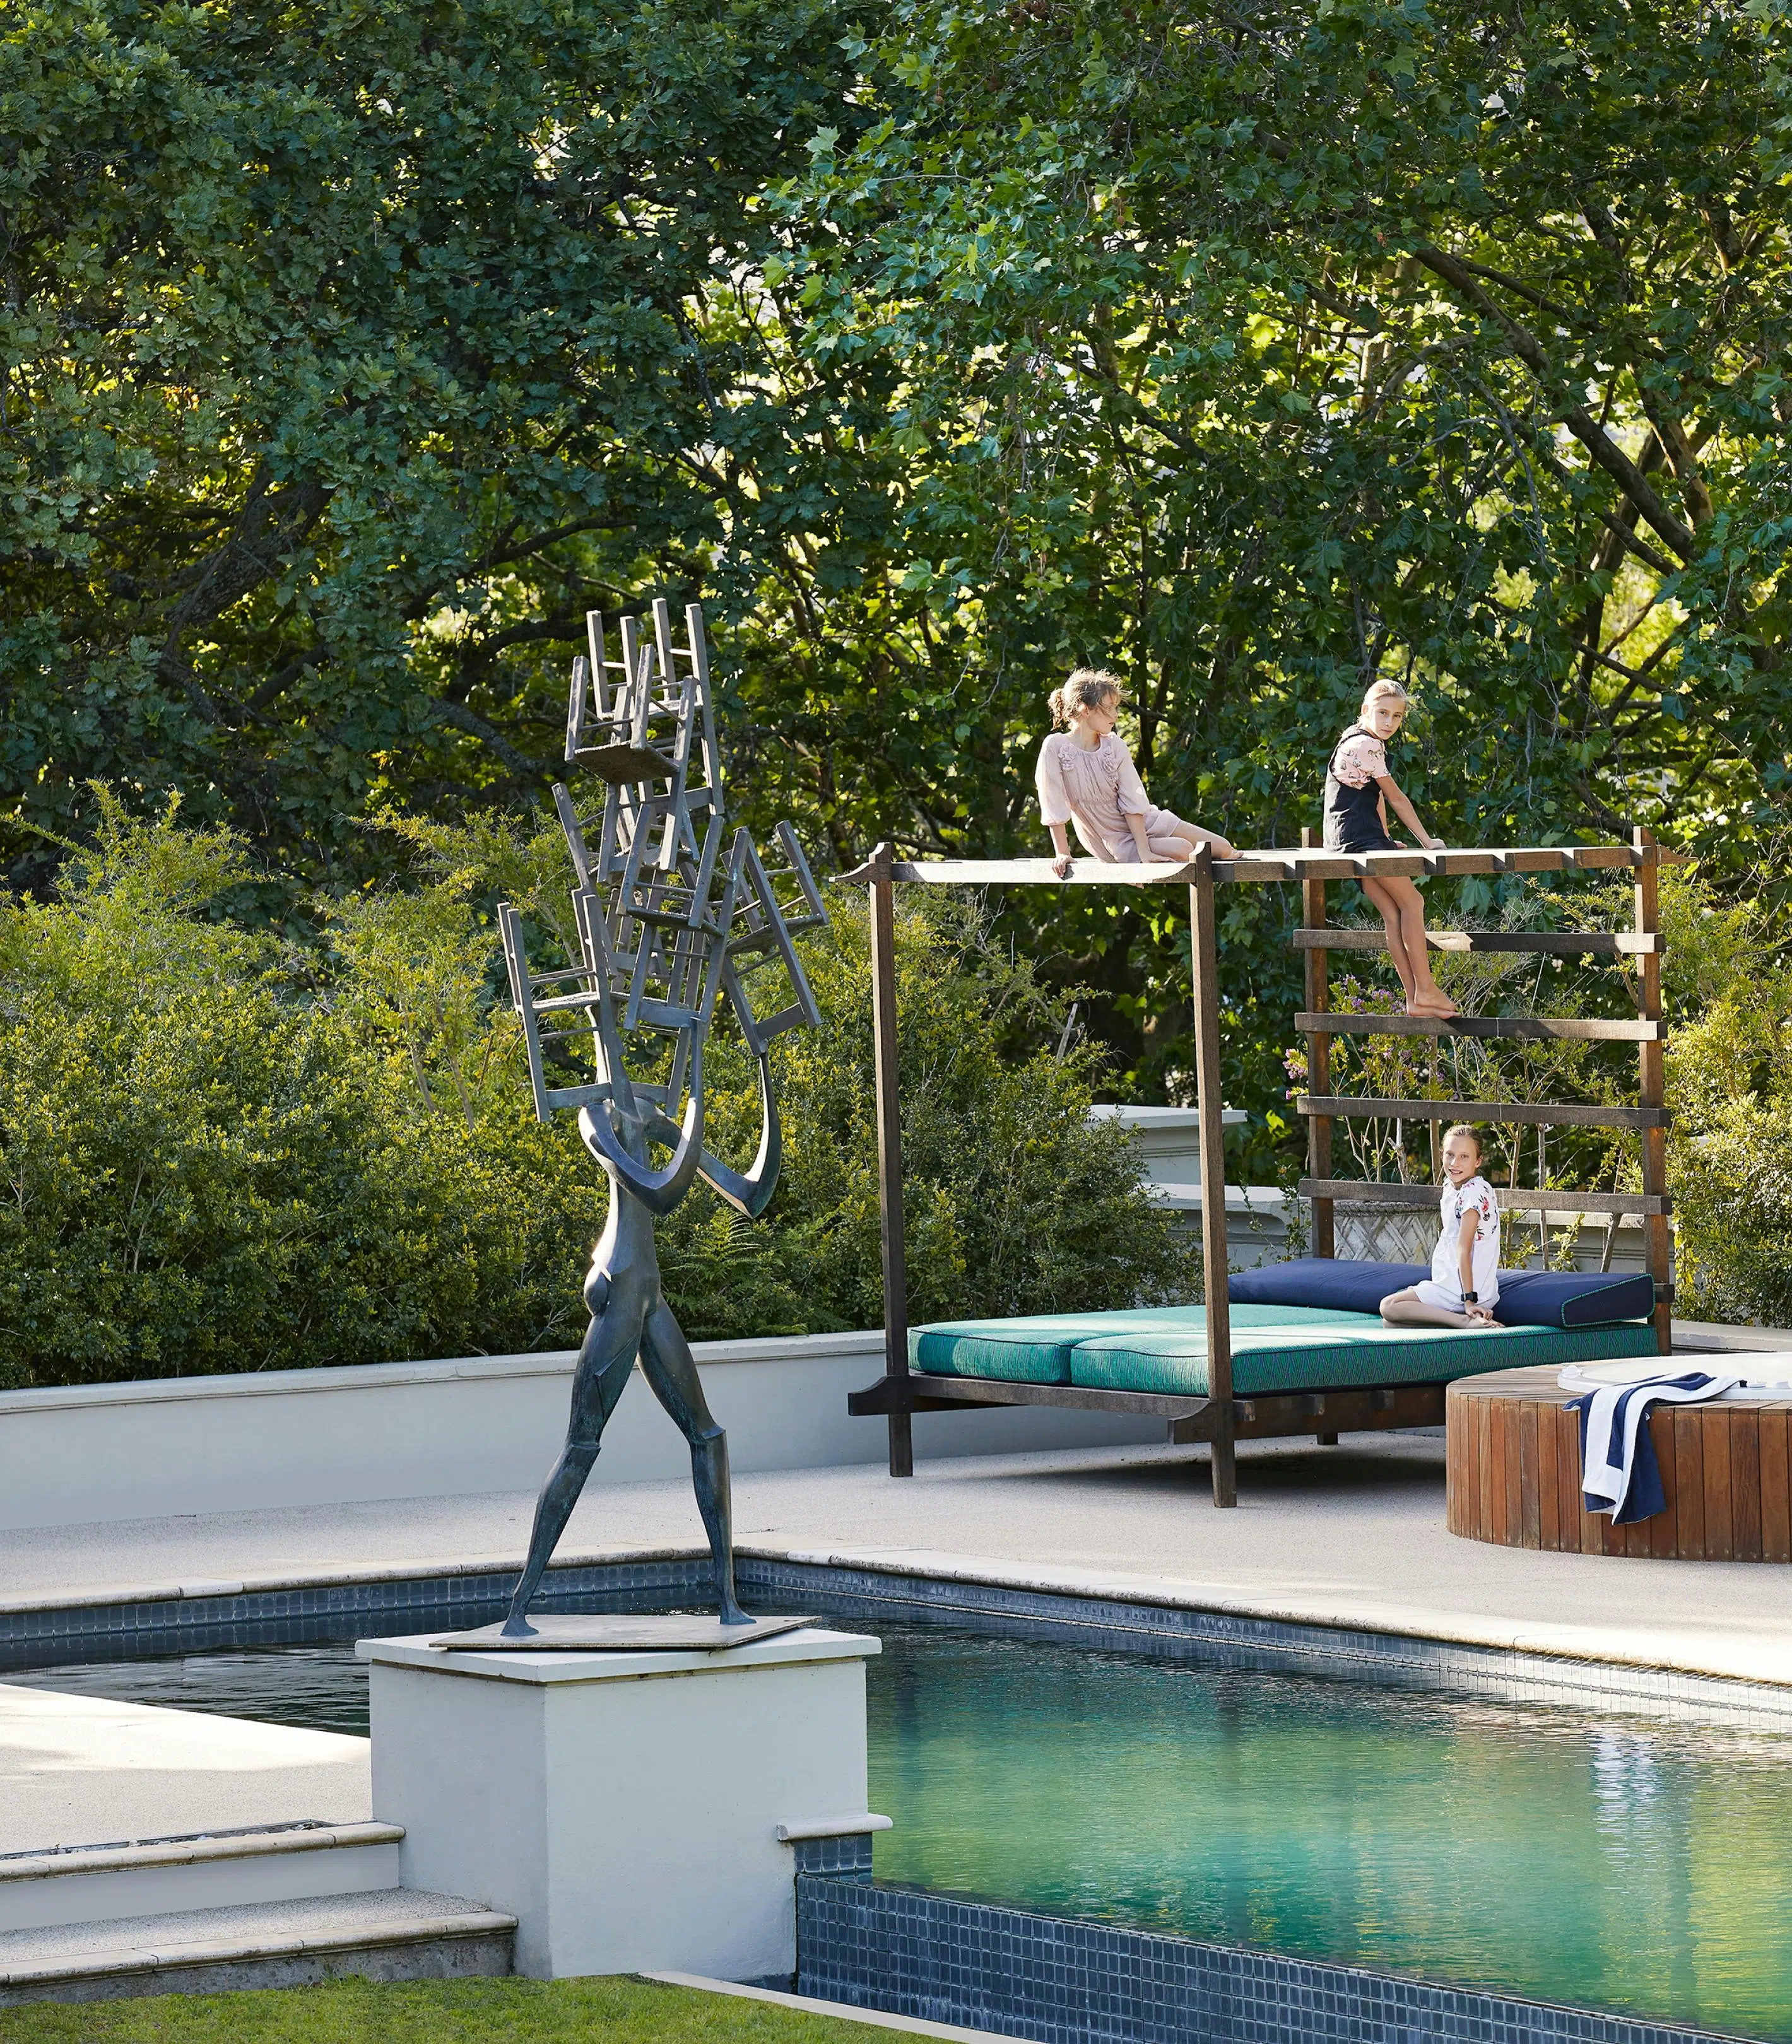 A contemporary sculpture beside an outdoor swimming pool in the foreground and children seated on a 4-poster daybed in the background.